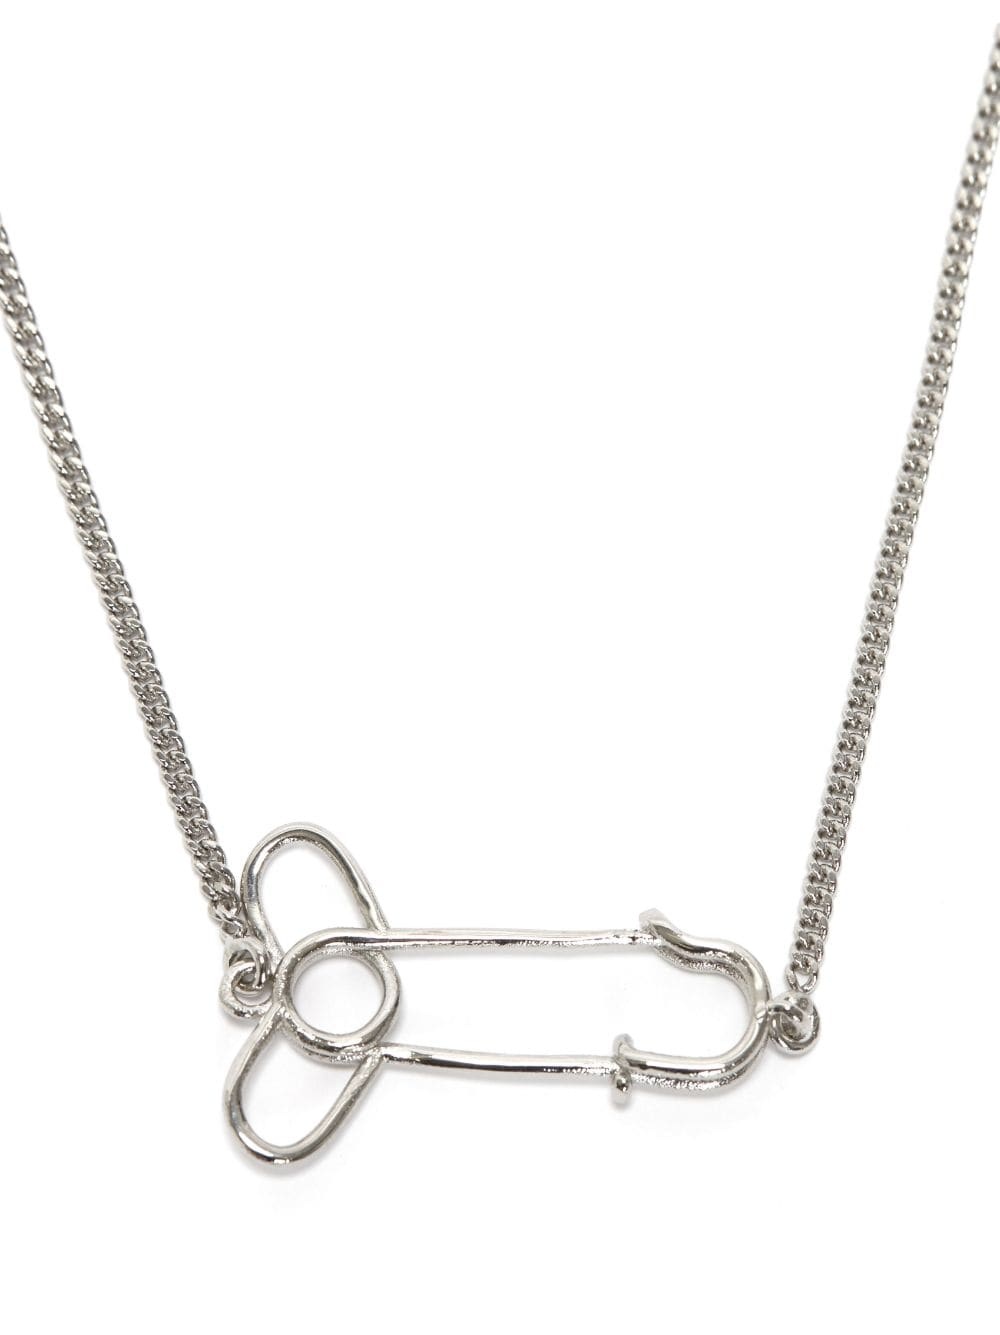 safety-pin pendant necklace - 1